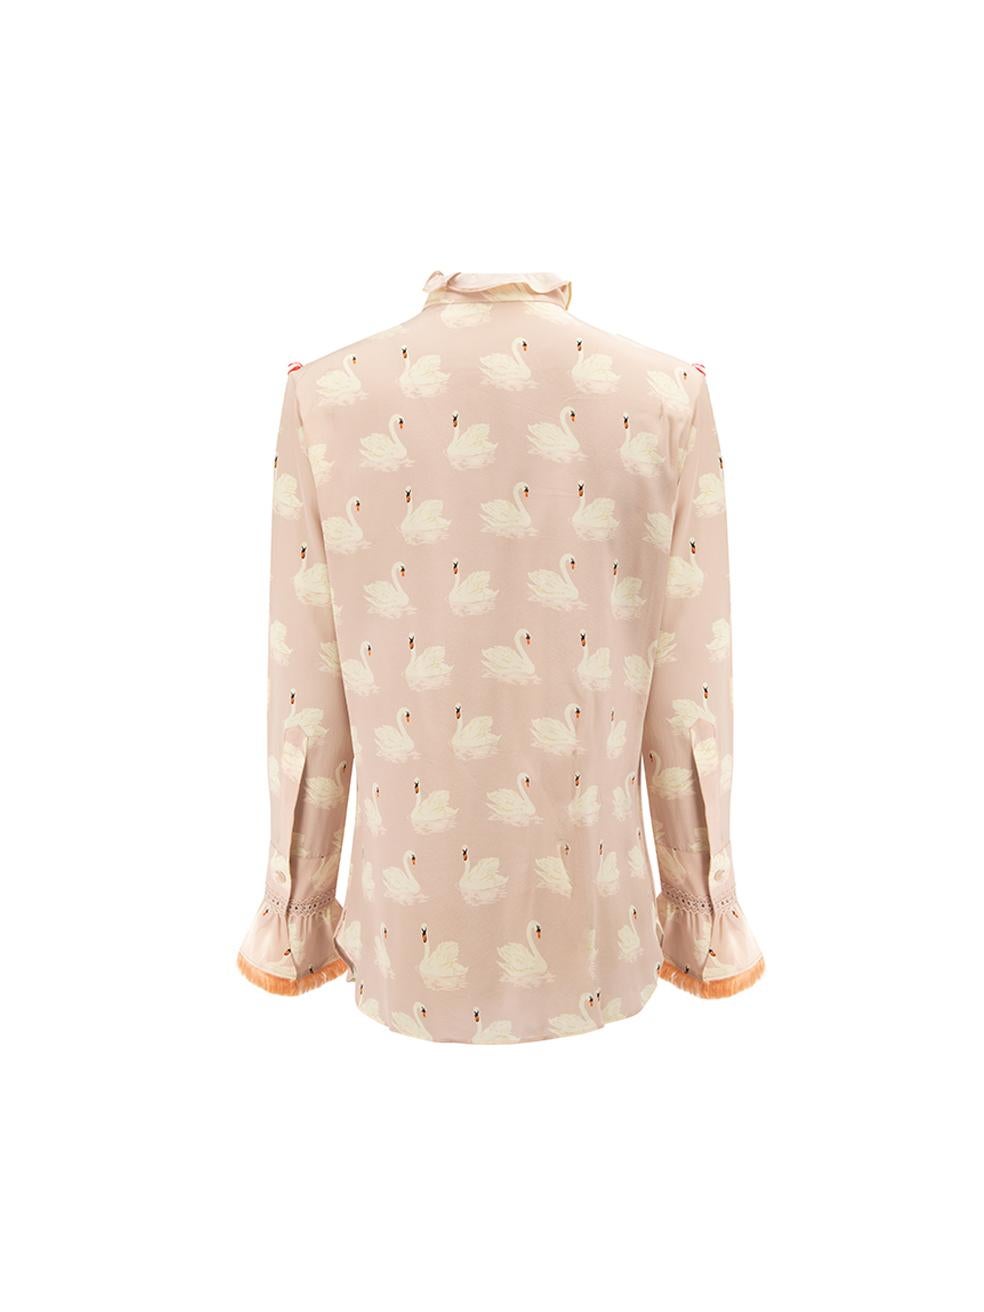 Stella McCartney Women's Pink Printed Ruffle Trim Blouse In Good Condition In London, GB